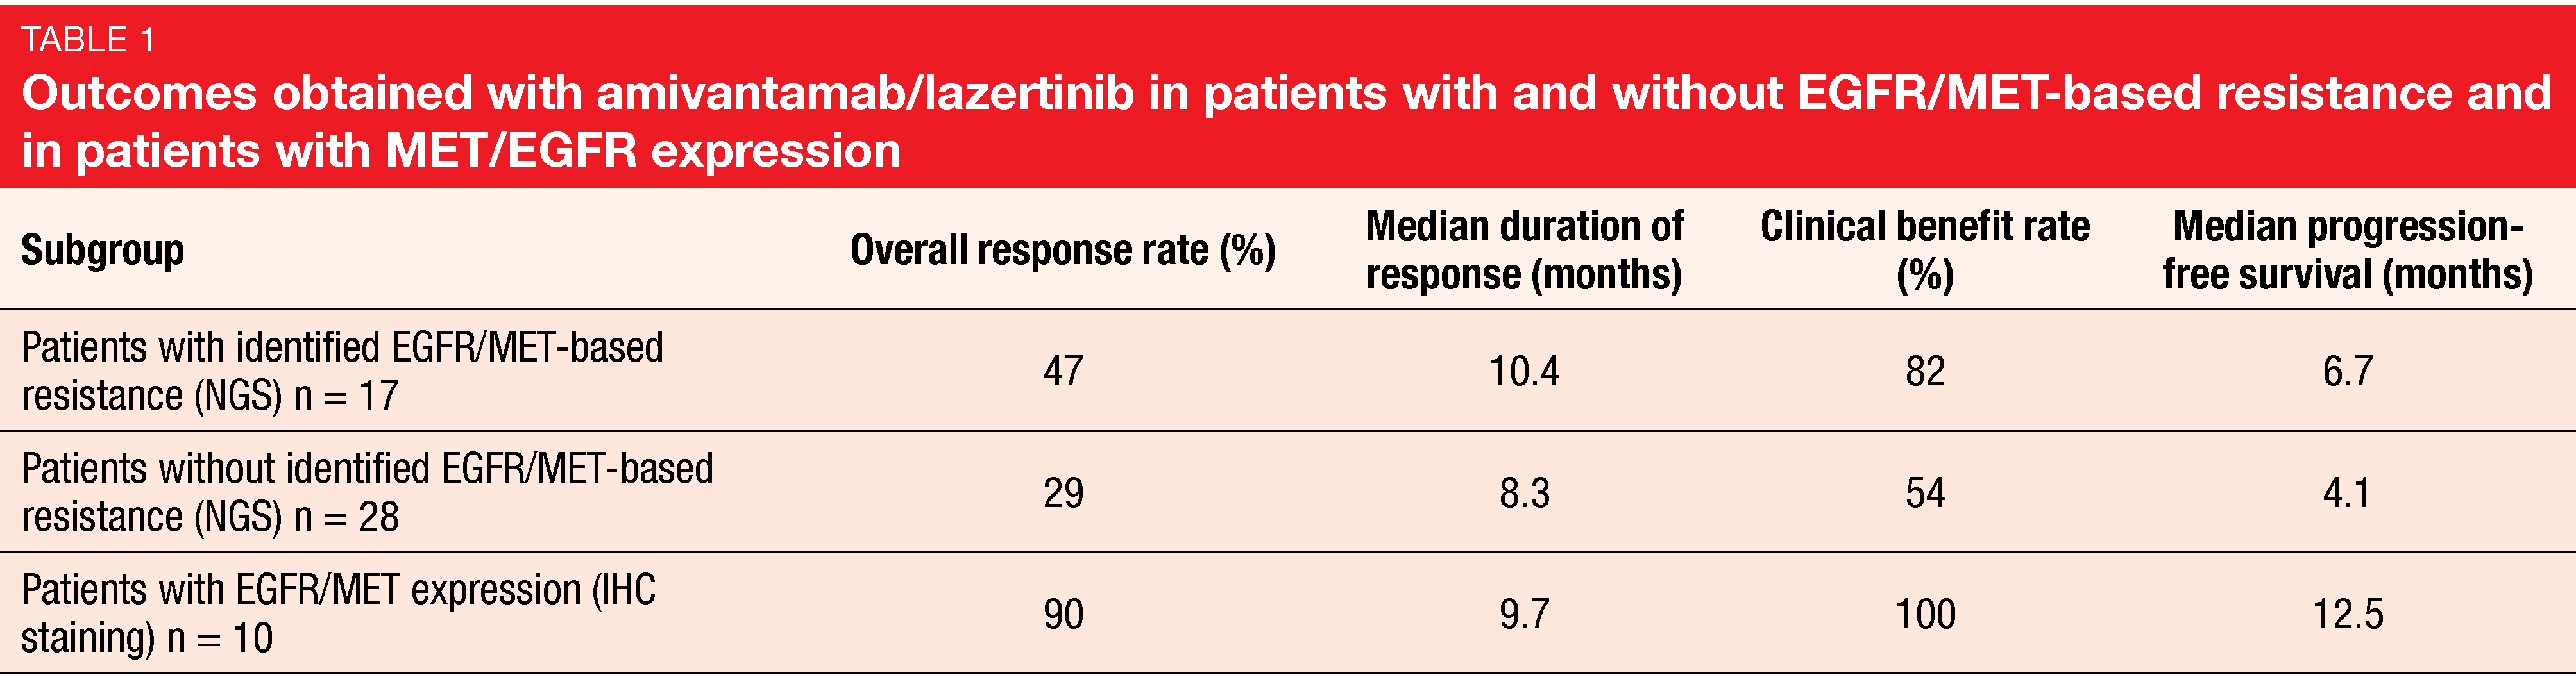 Table 1 Outcomes obtained with amivantamab/lazertinib in patients with and without EGFR/MET-based resistance and in patients with MET/EGFR expression